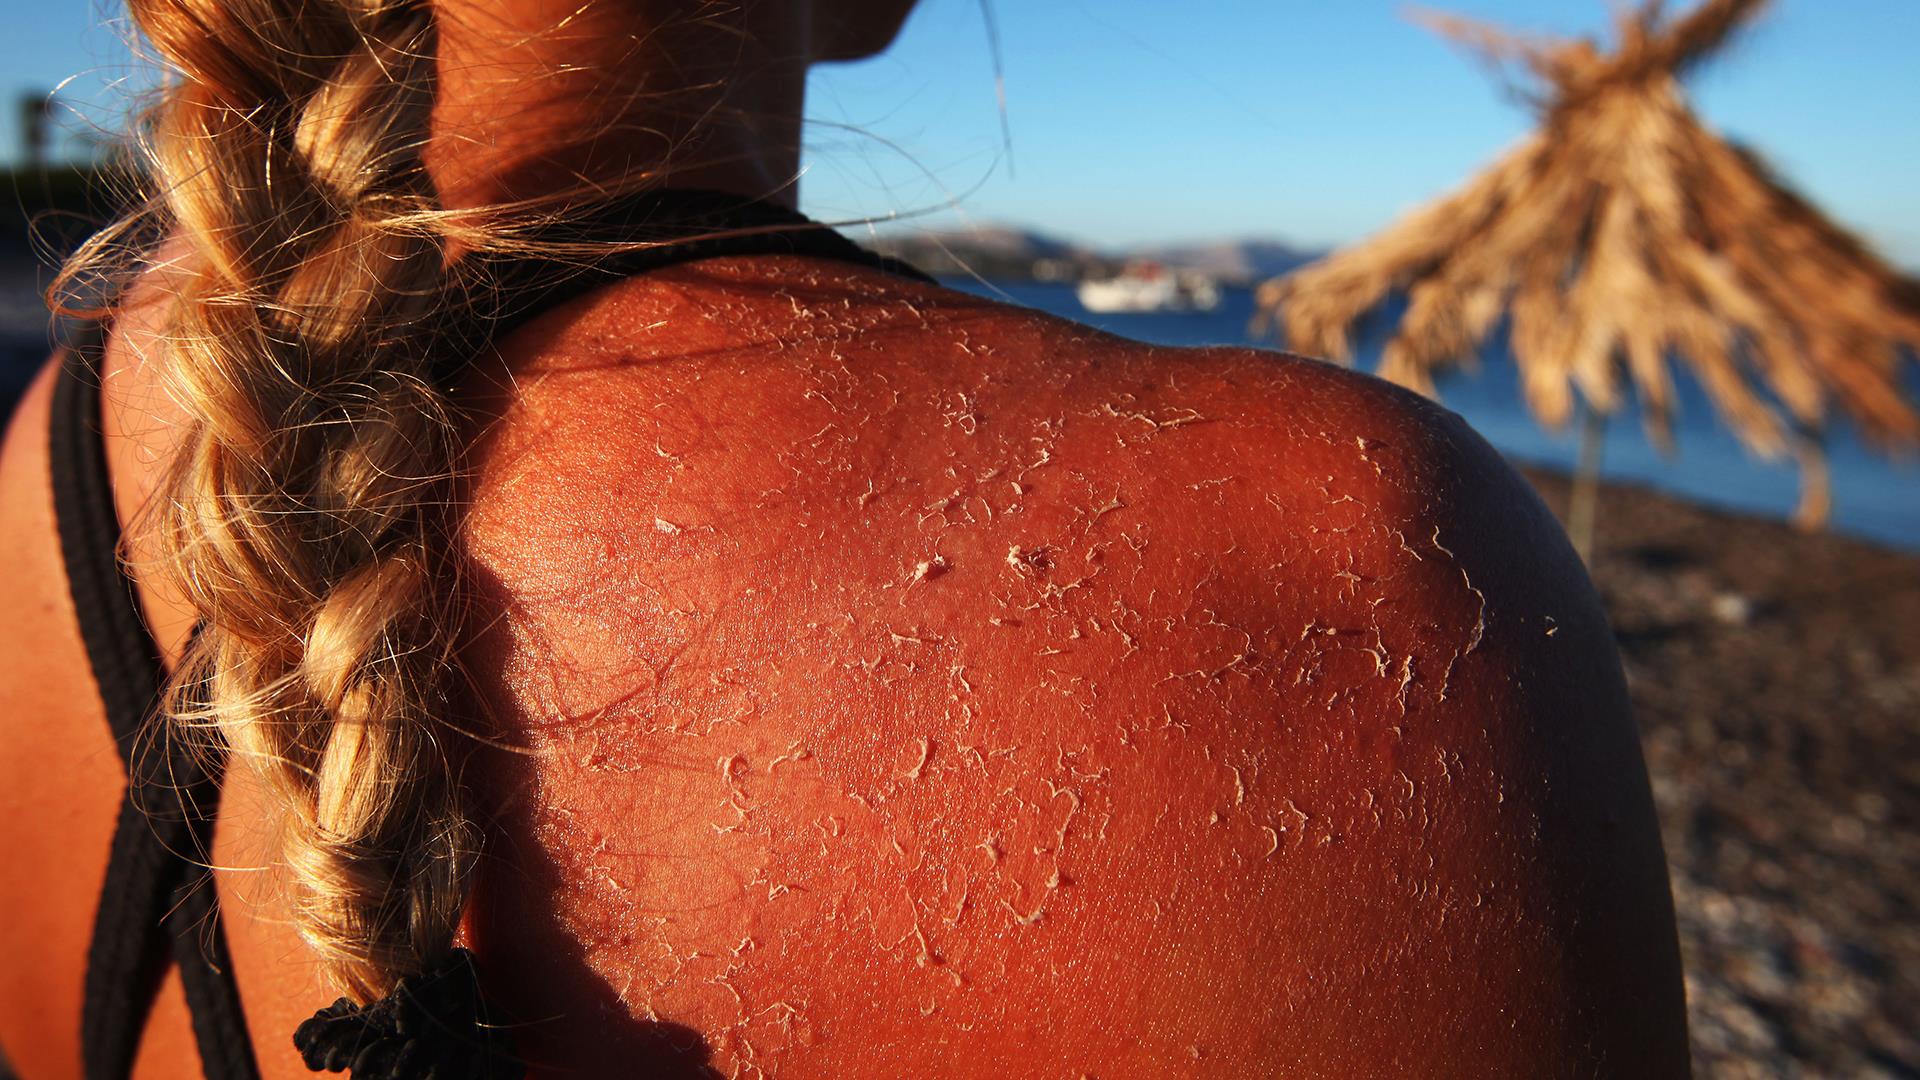 How many sunburns does it take to get skin cancer?